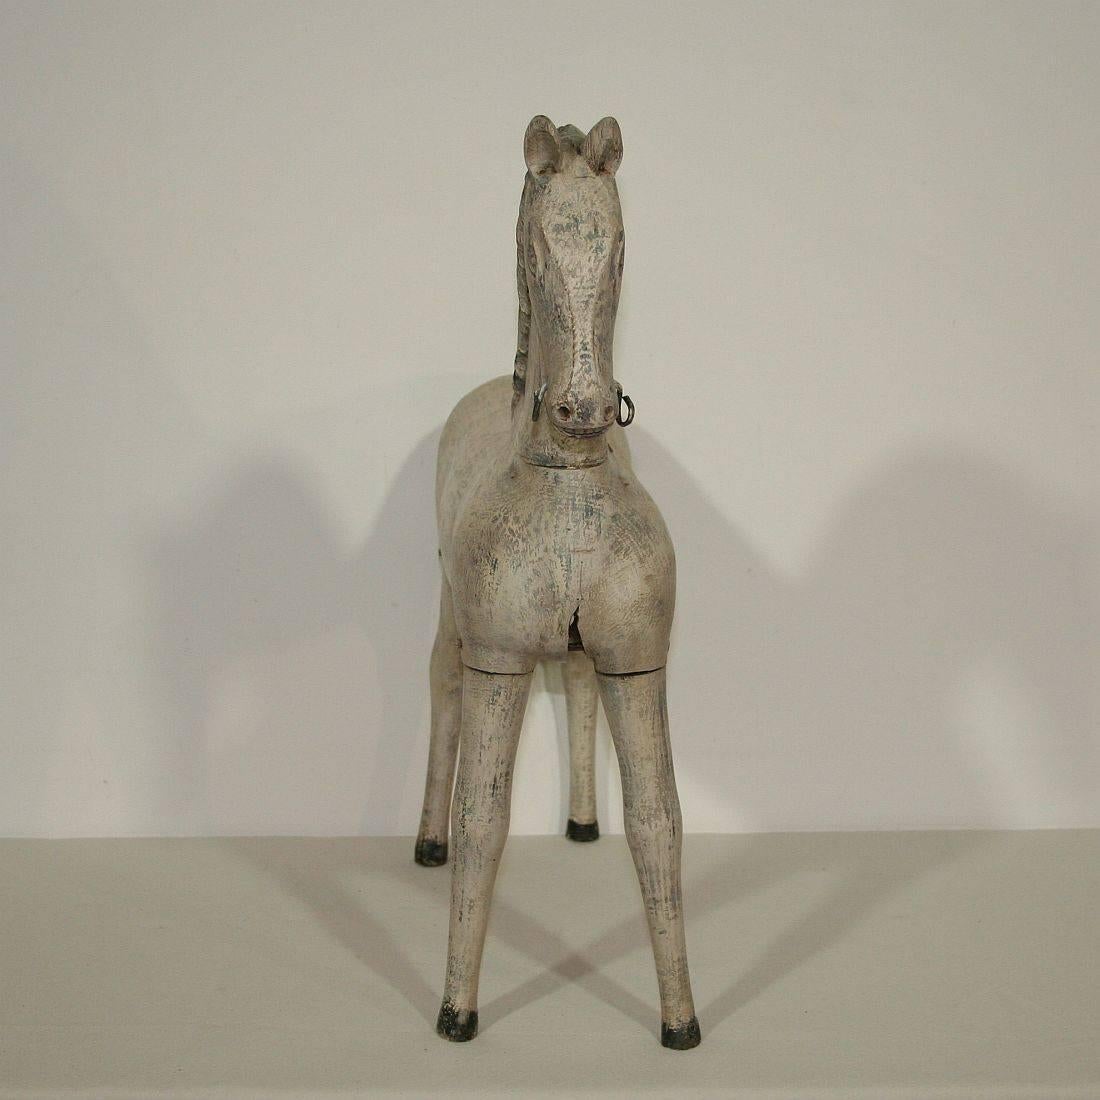 Hand-Carved French 18th-19th Century Folk Art Carved Wooden Horse